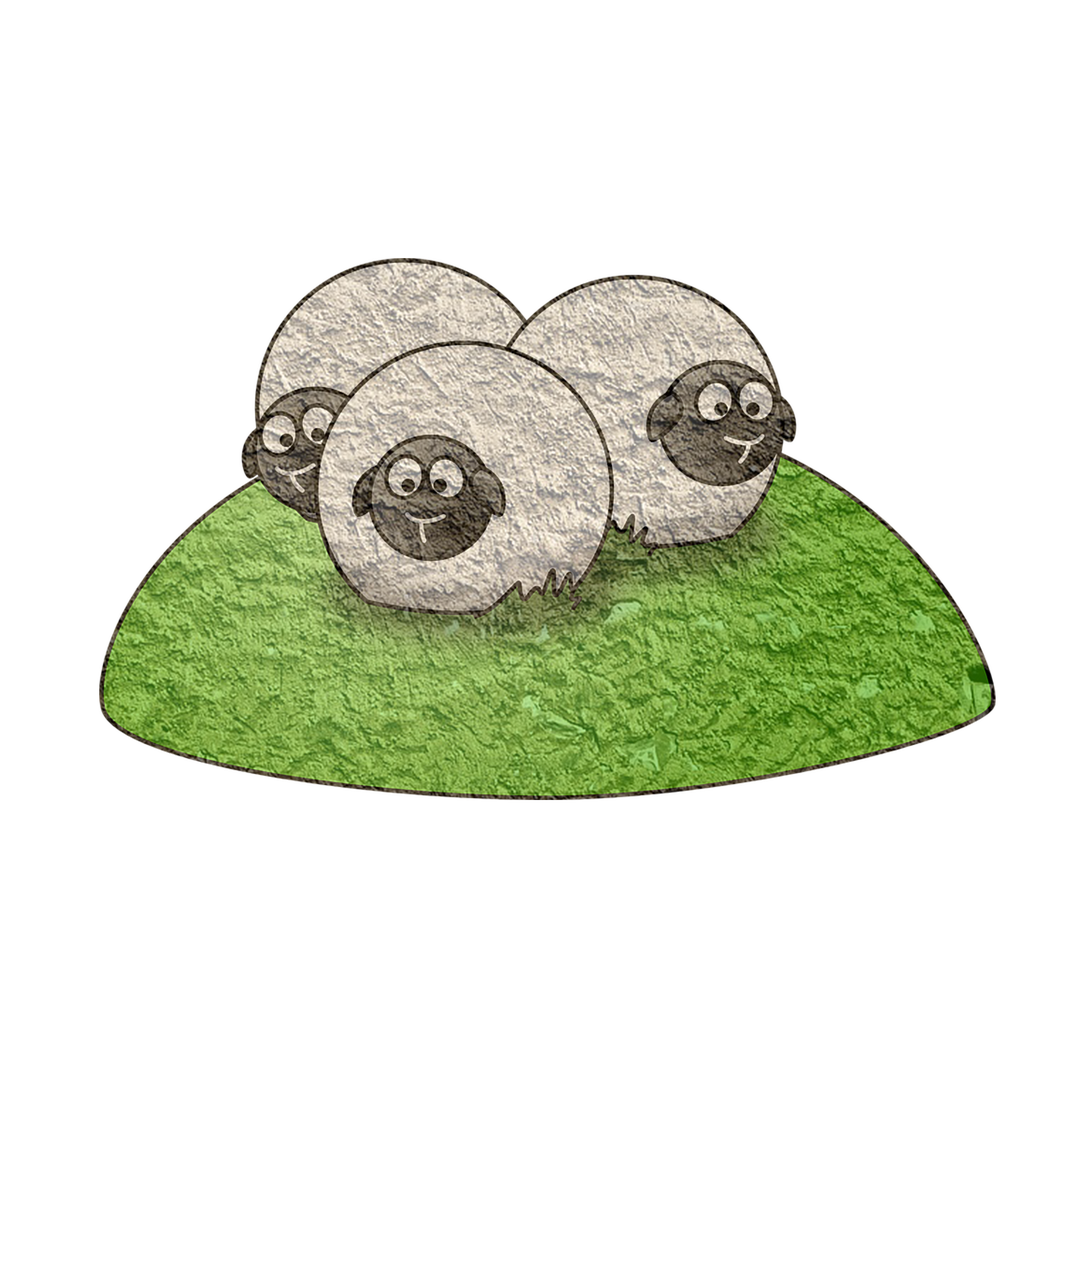 a couple of sheep laying on top of a lush green field, an illustration of, petri dish art. animal eyes, on a dark rock background, vignette illustration, three animals